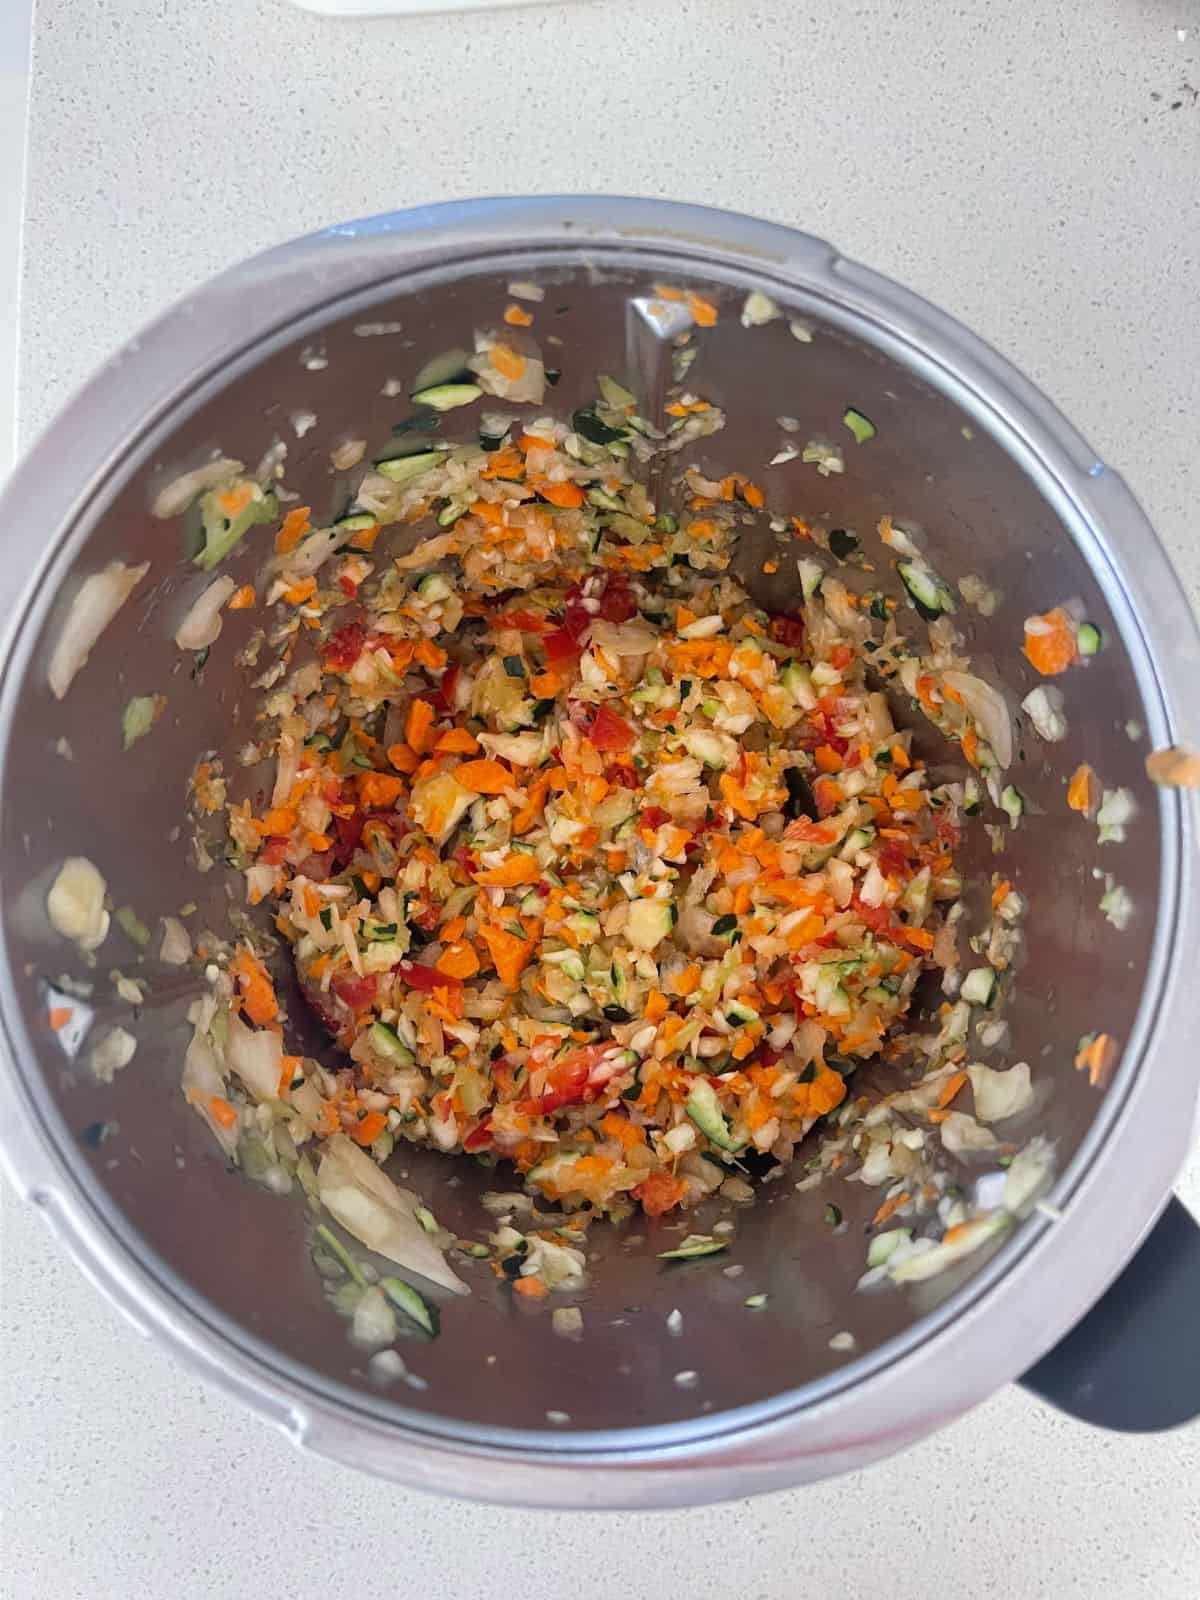 Grated vegetable in a Thermomix bowl.